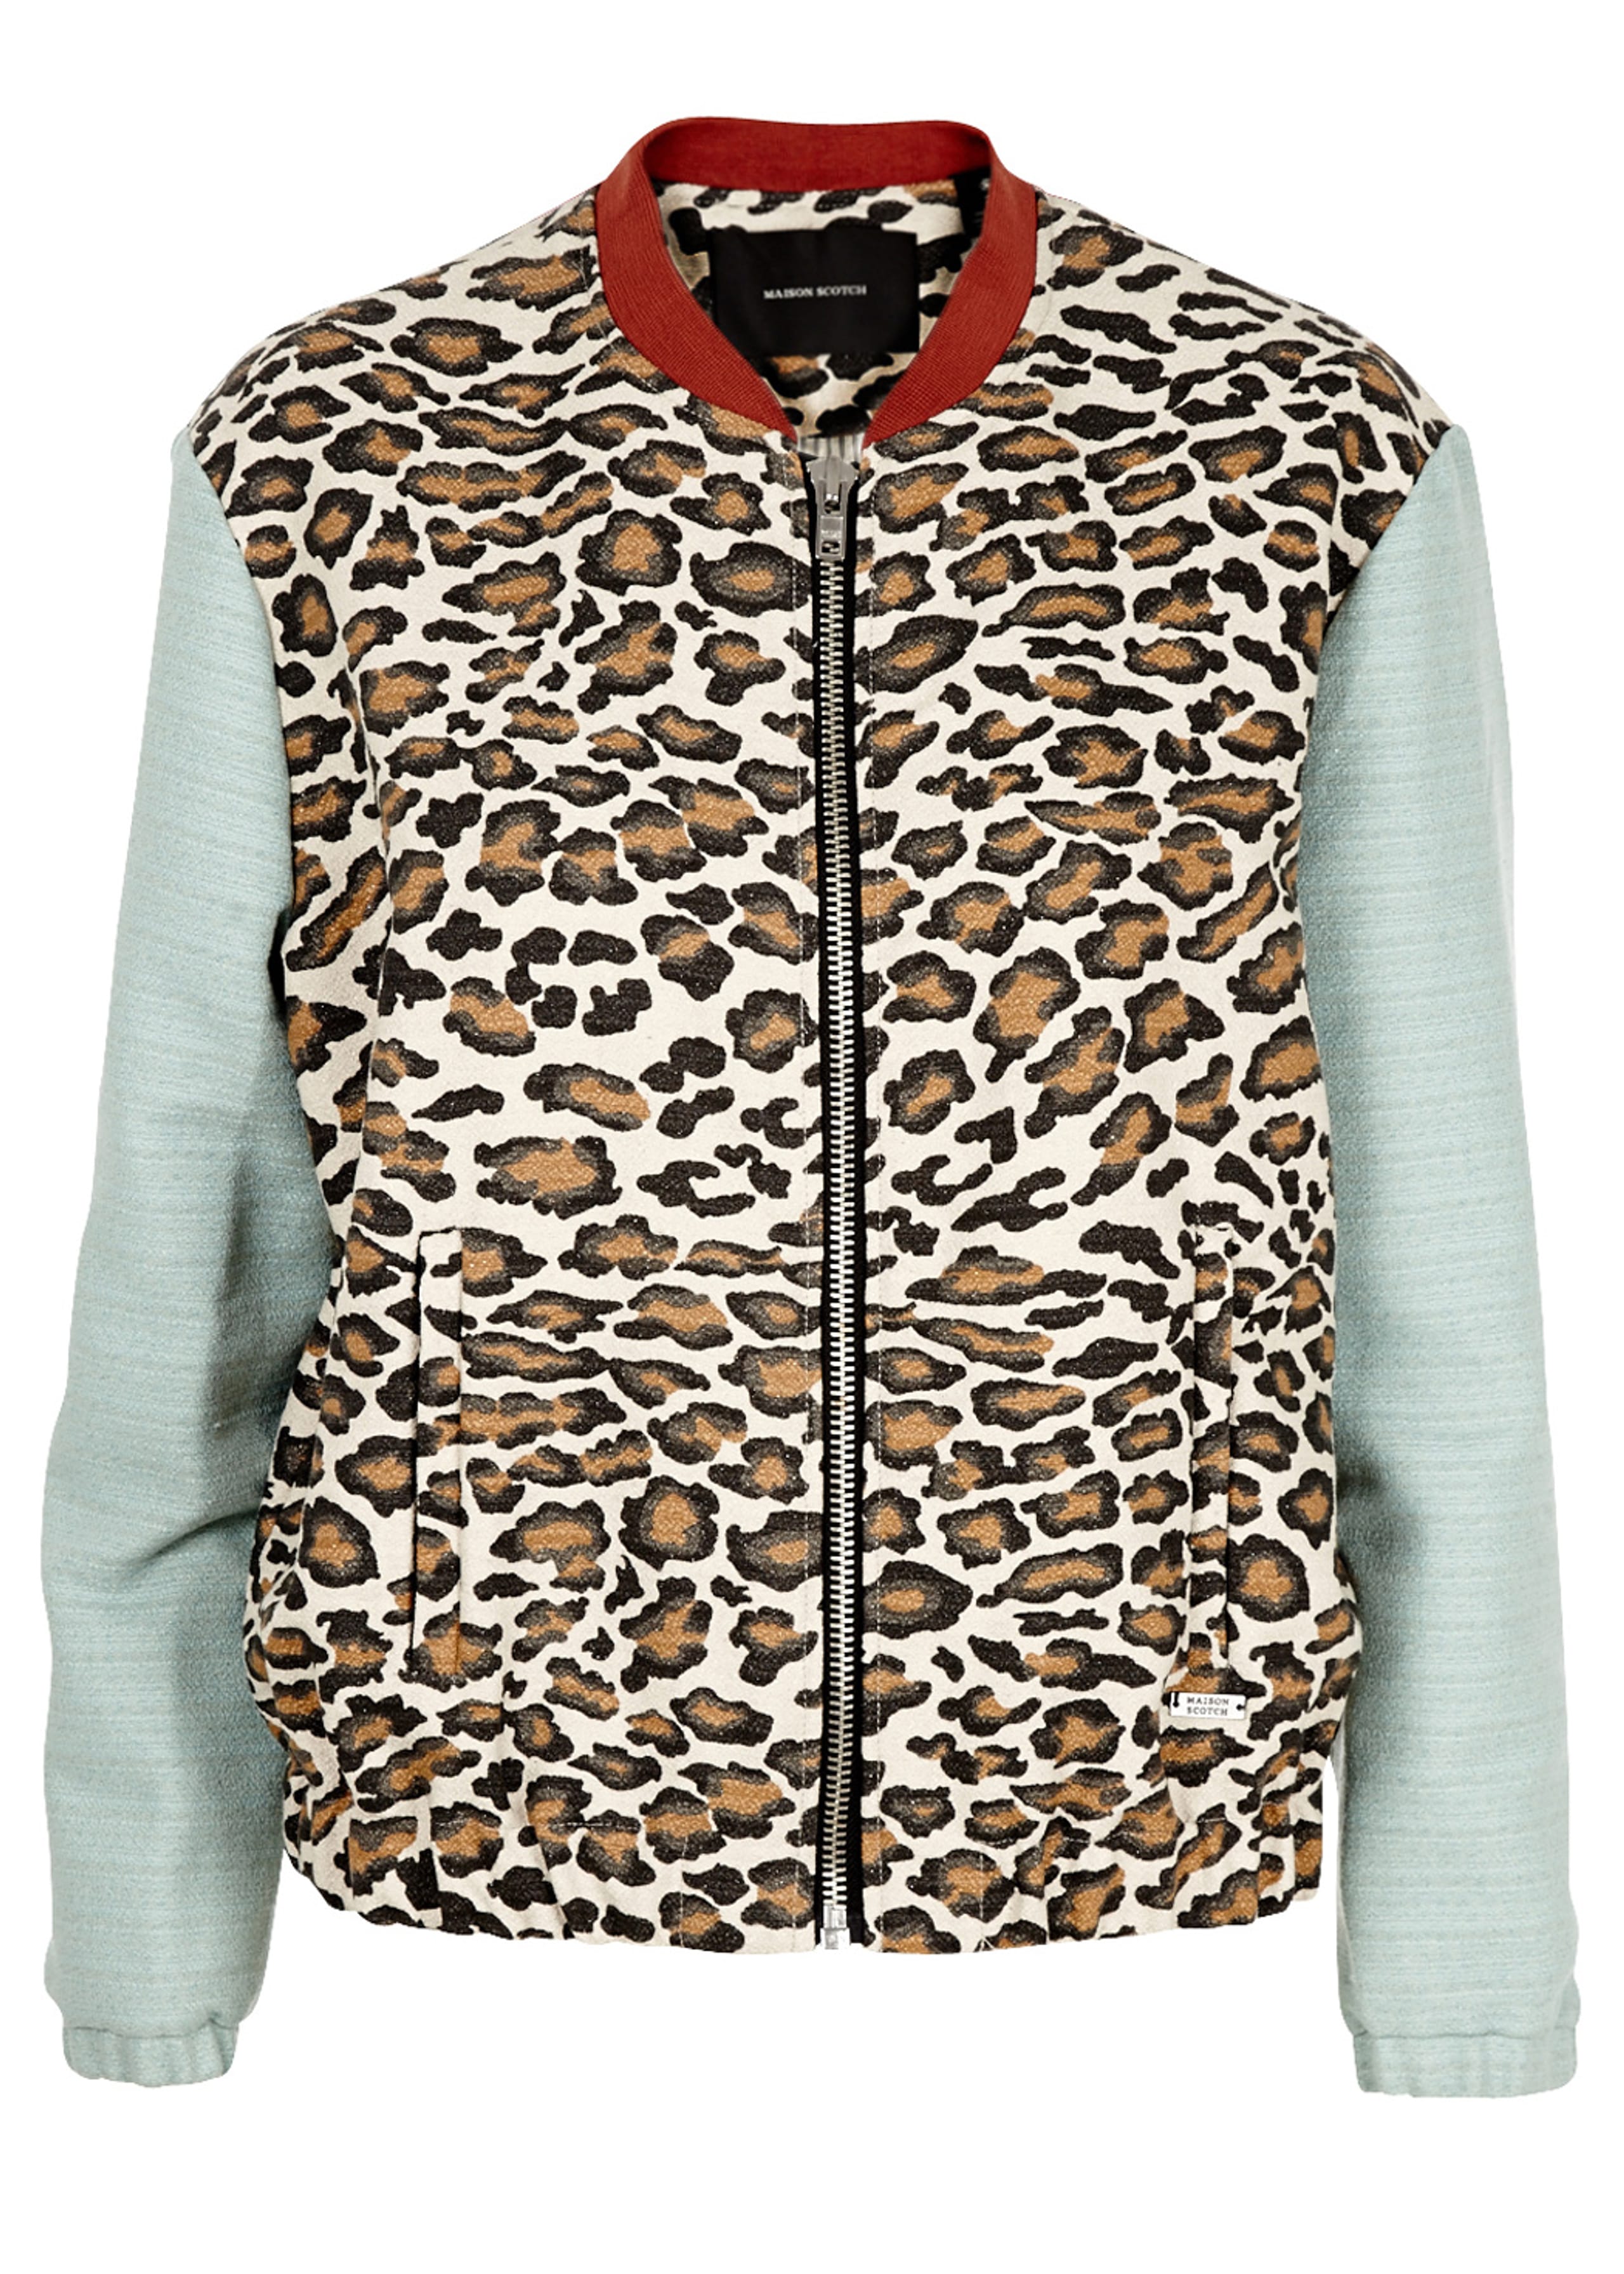 Relaxed Bomber Print - Jacket - Scotch